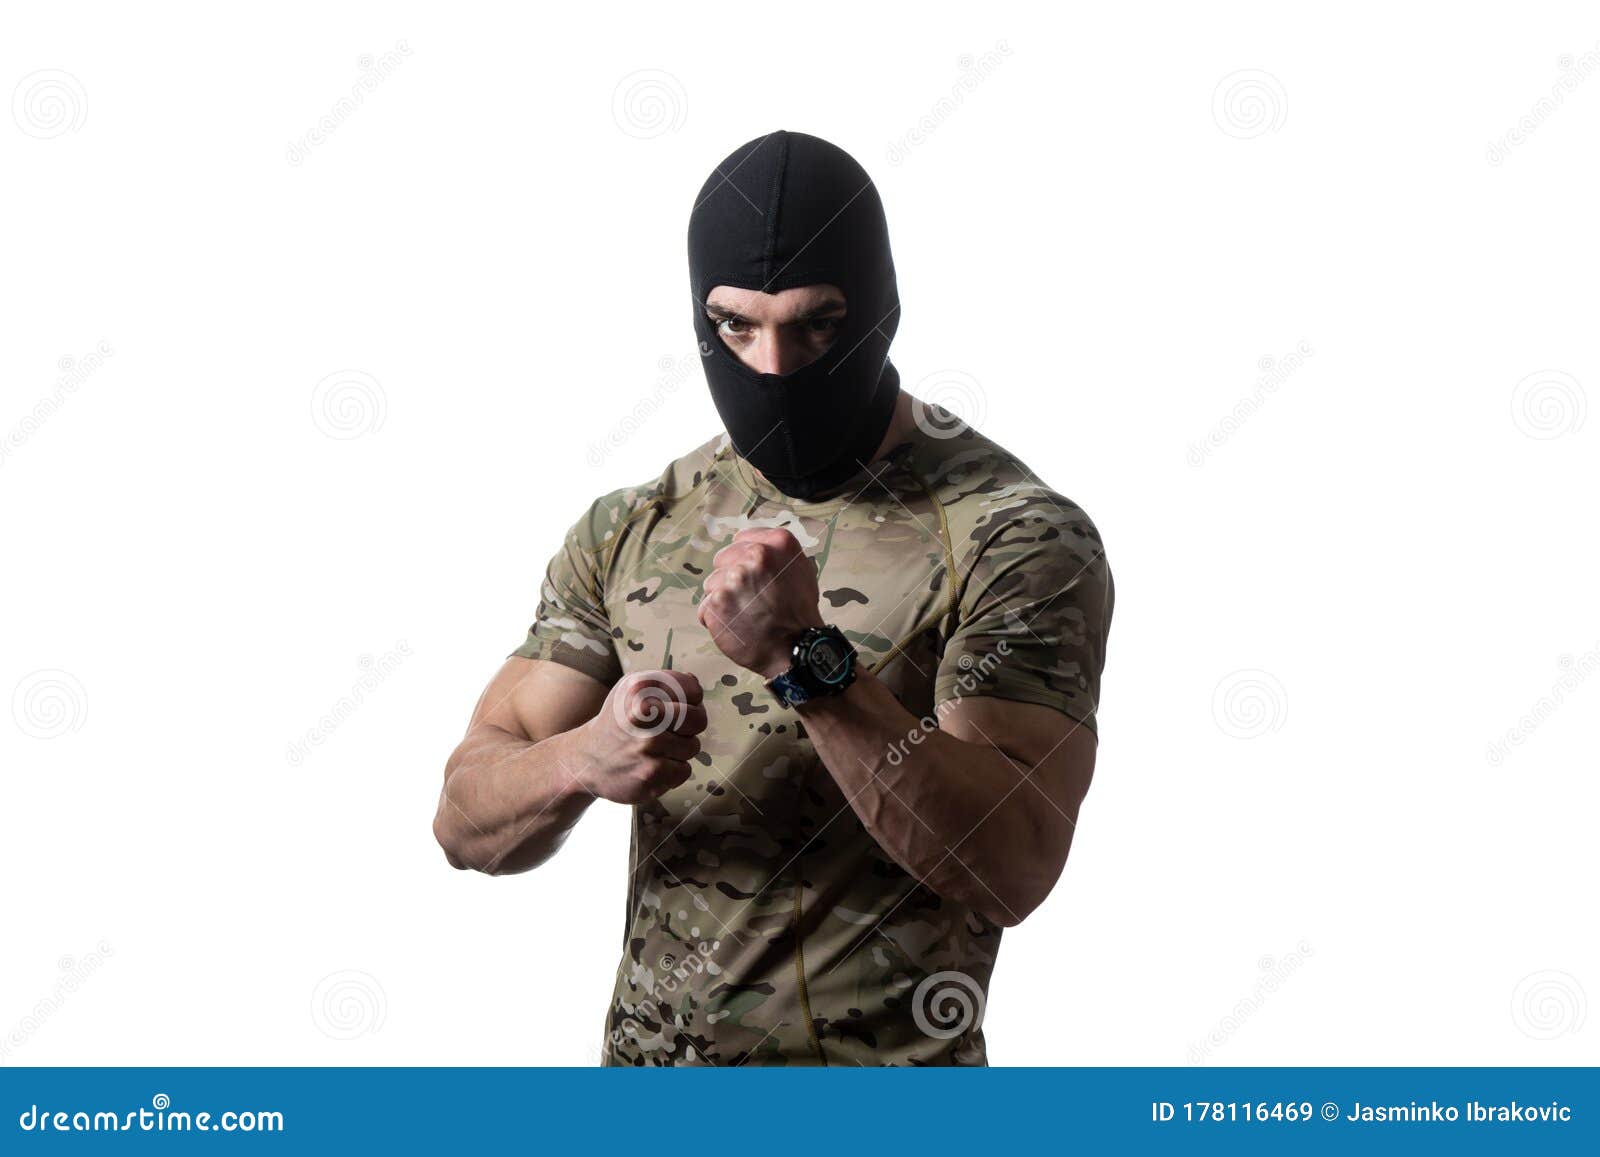 Warrior Ready To Fight on a White Background Stock Image - Image of ...